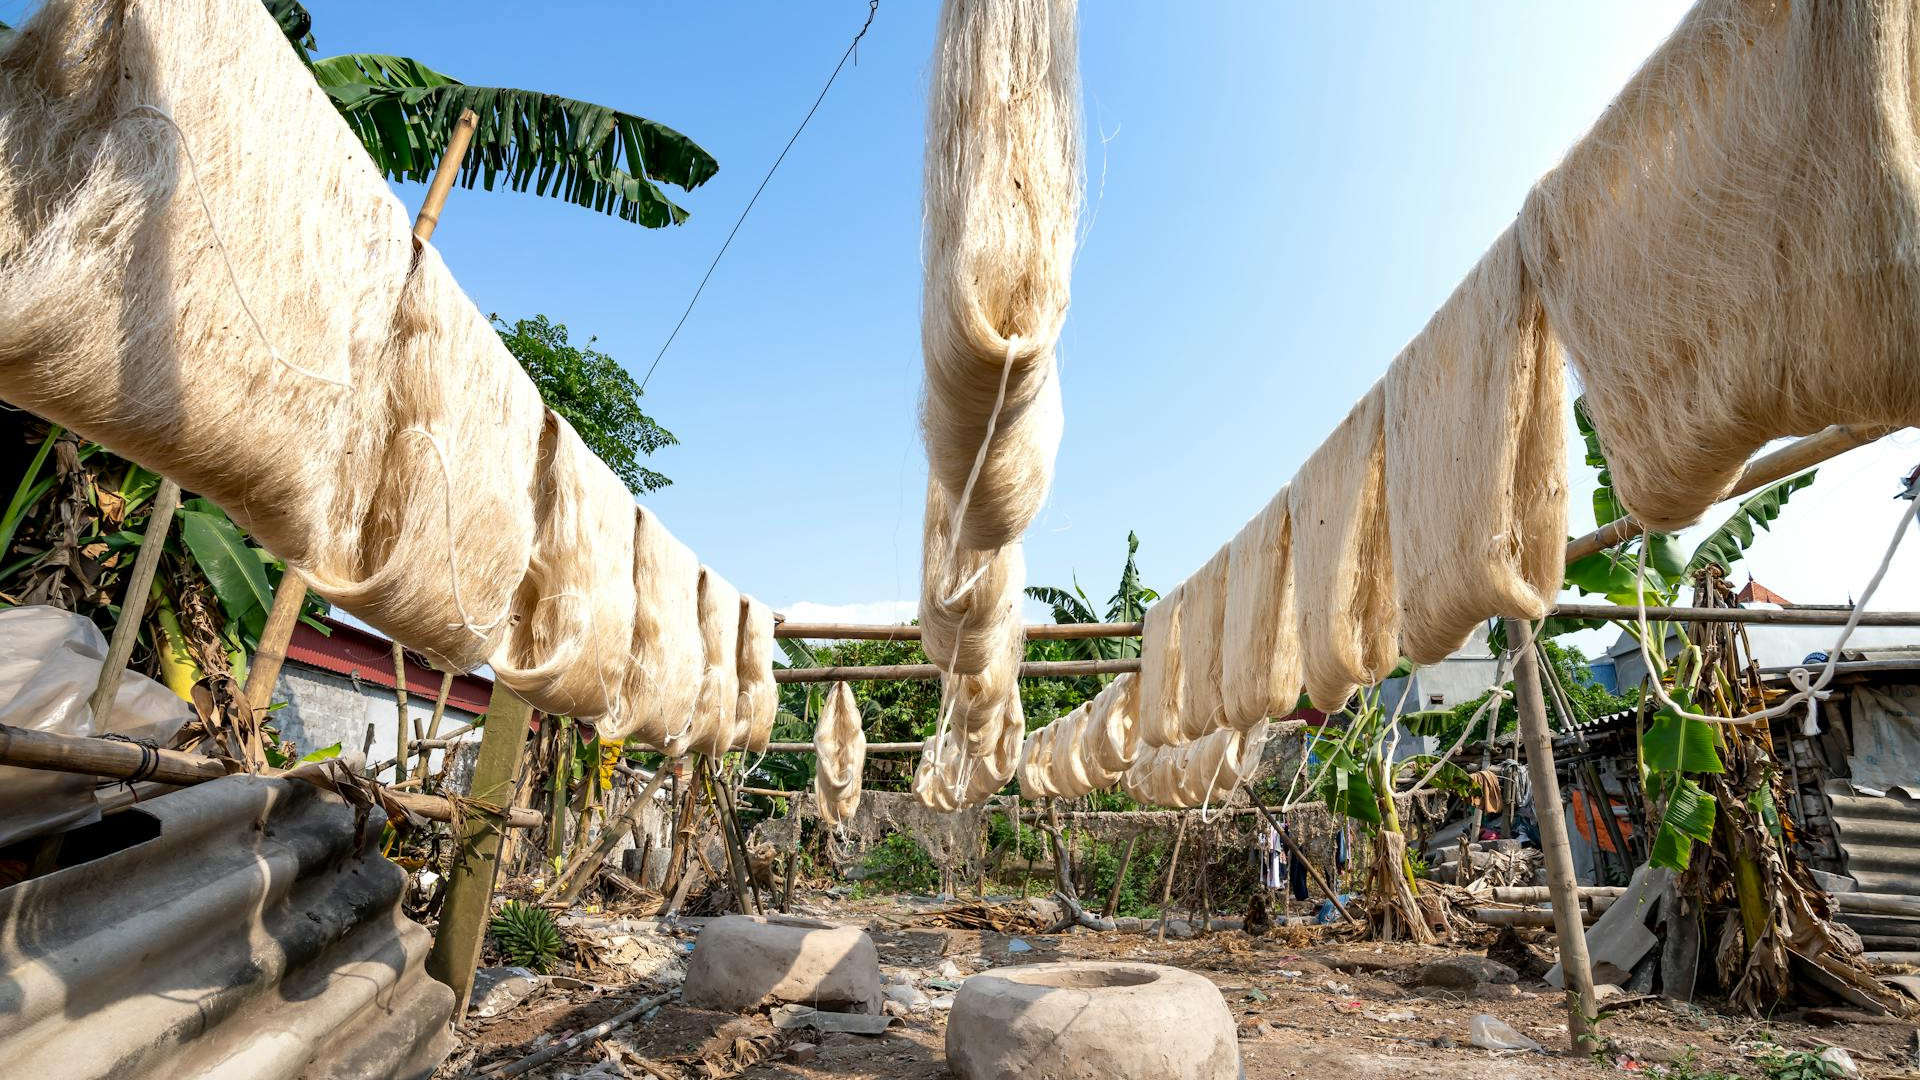 New silk fibers dry on lines in the sun. Image by Quang Nguyen Vinh via Pexels.